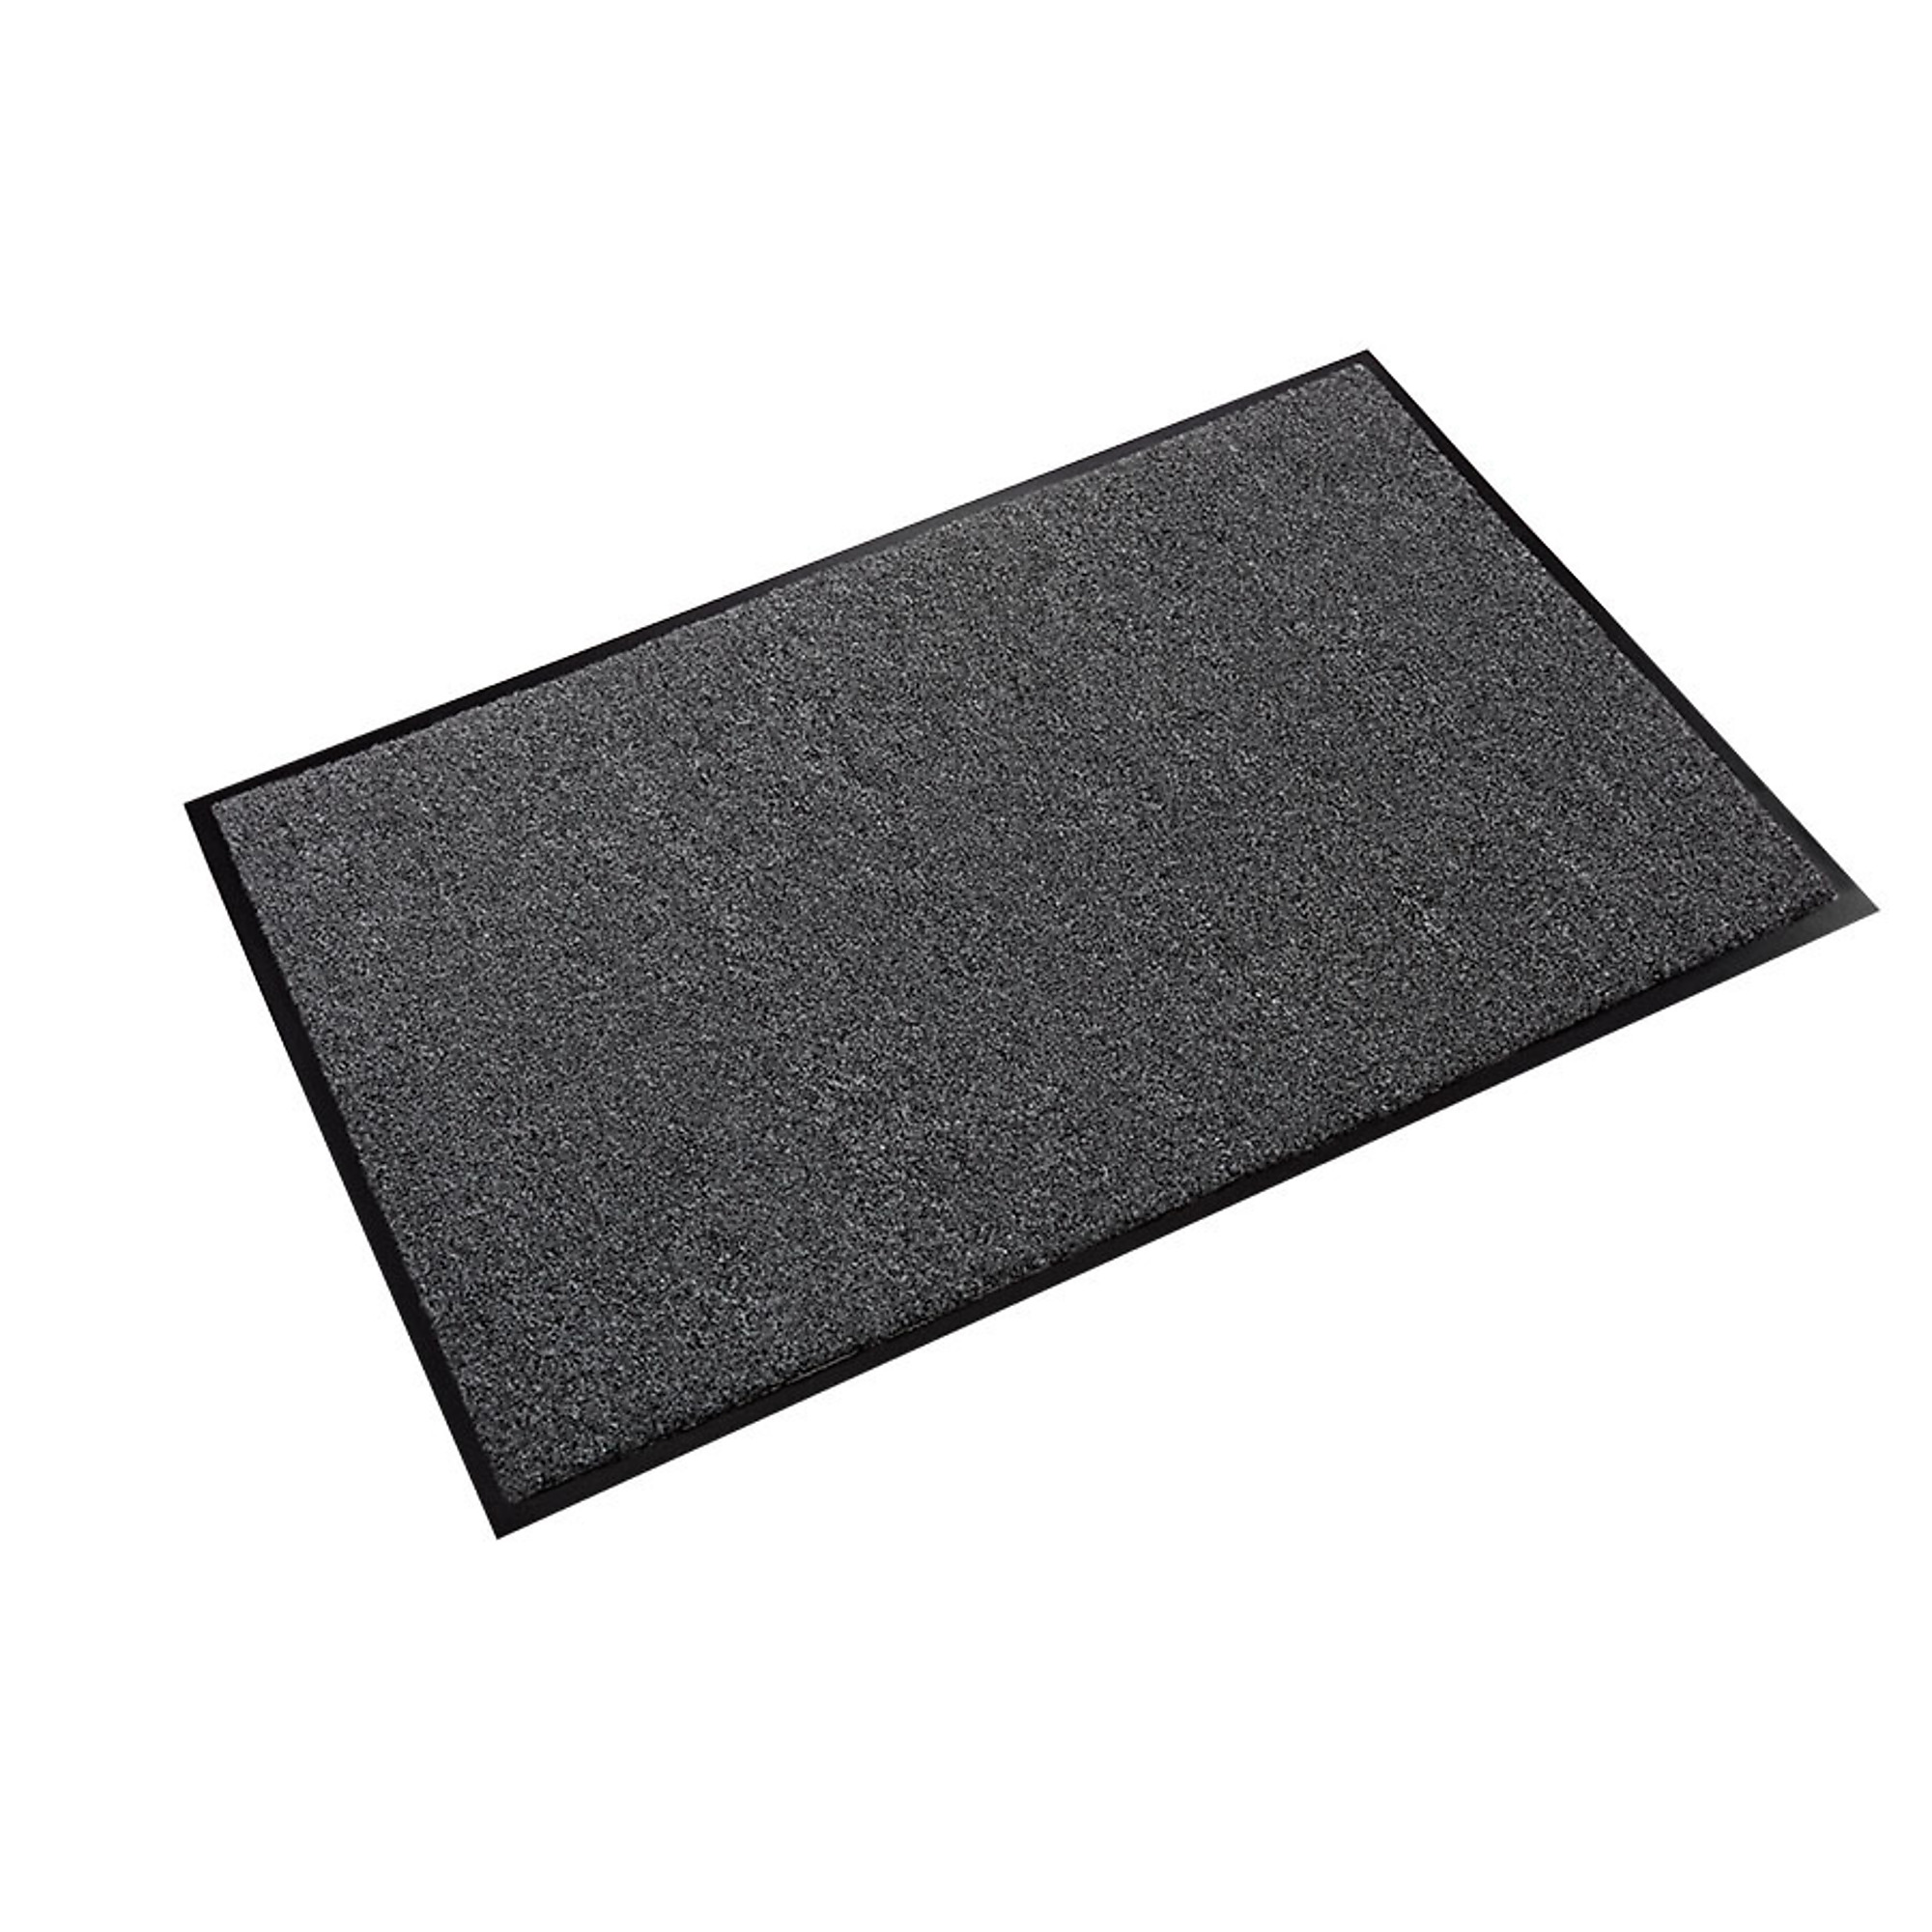 Crown Matting Technologies, Rely-On Olefin 3ft.x10ft. Charcoal, Width 36 in, Length 120 in, Thickness 3/8 in, Model GS 0310CH